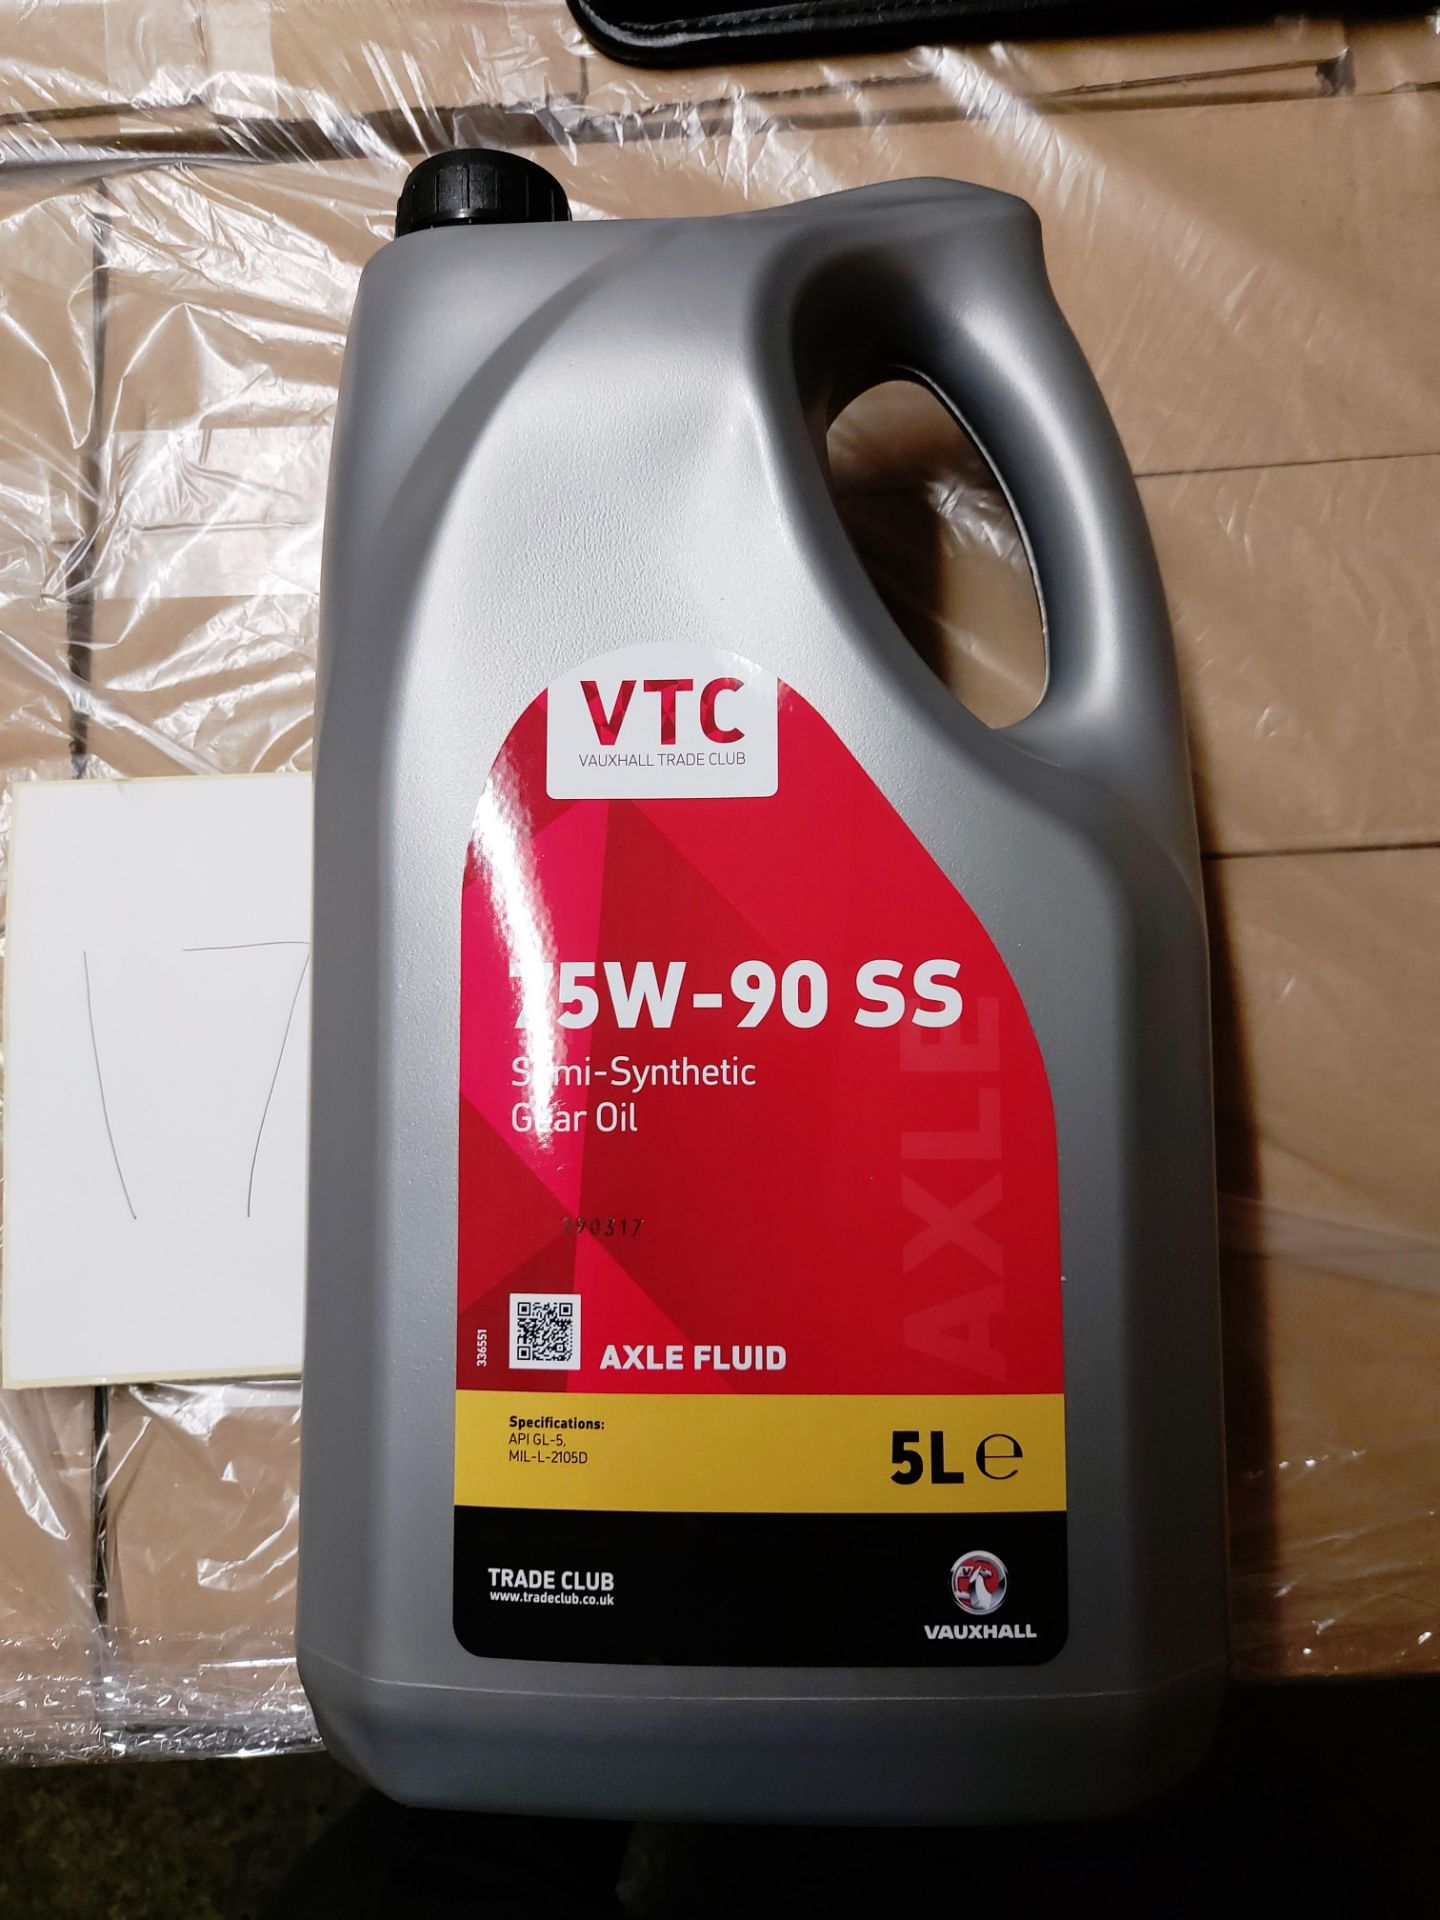 116 x 5 litre tubs of VTC 75W-90 SS semi synthetic gear oil on 1 pallet (pallet 17)